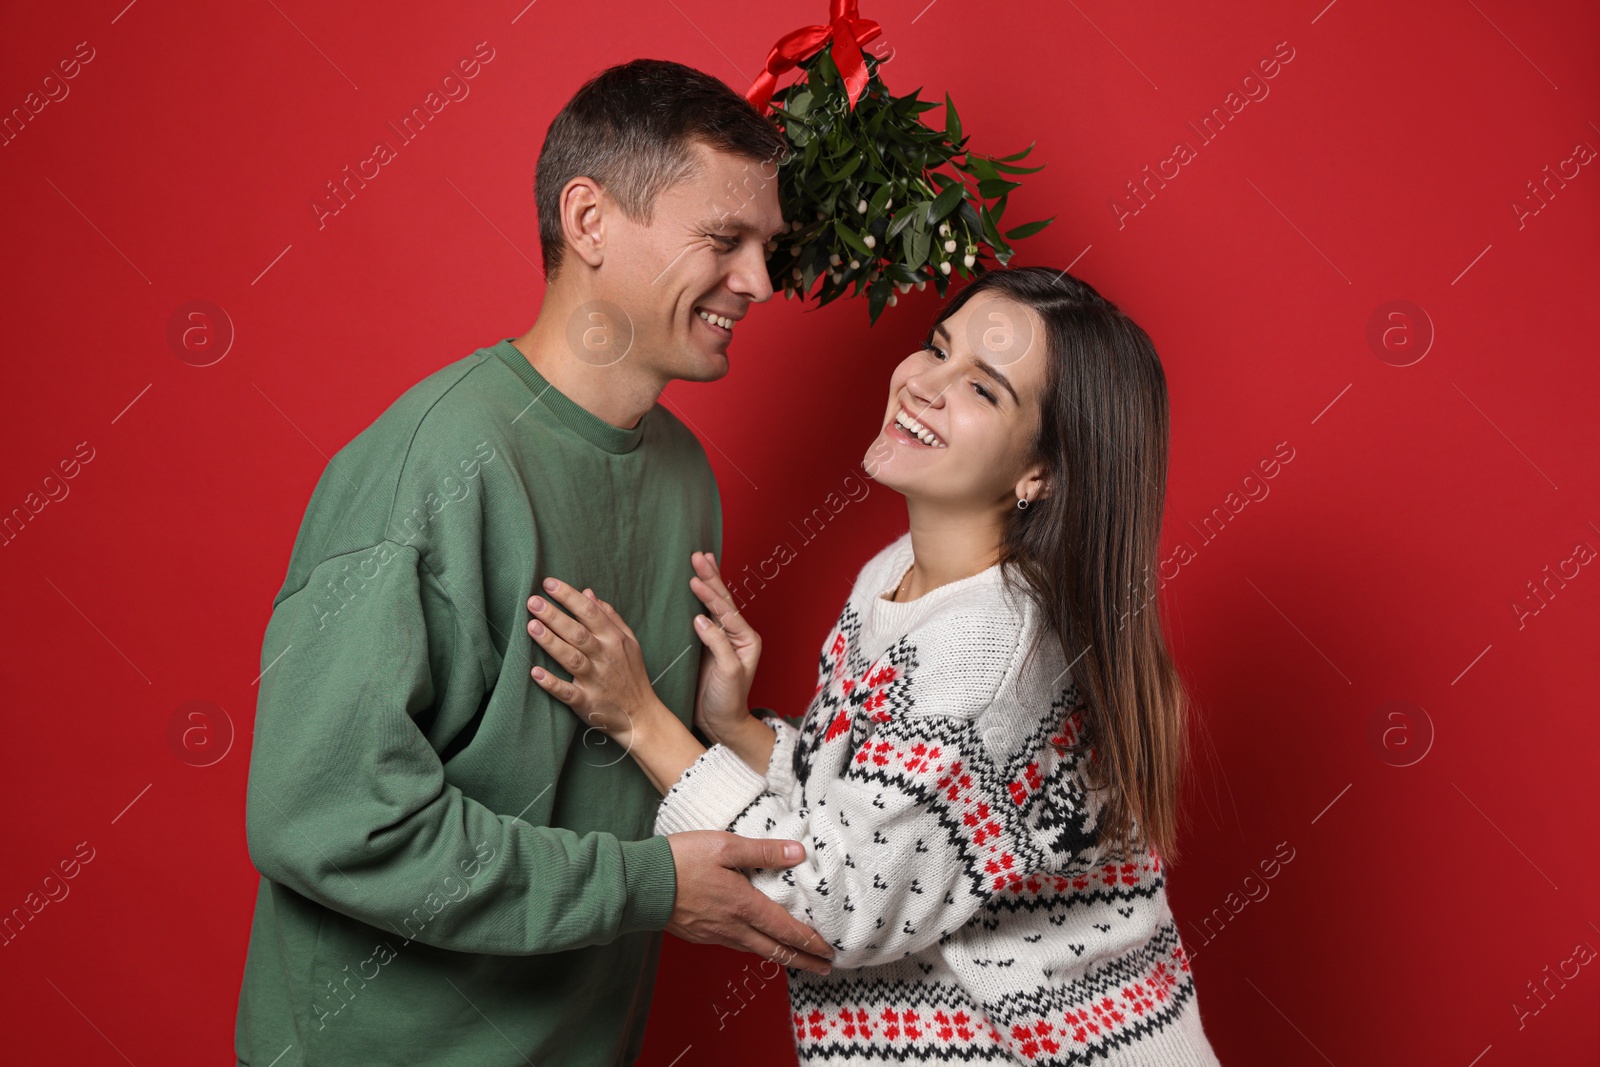 Photo of Happy couple standing under mistletoe bunch on red background